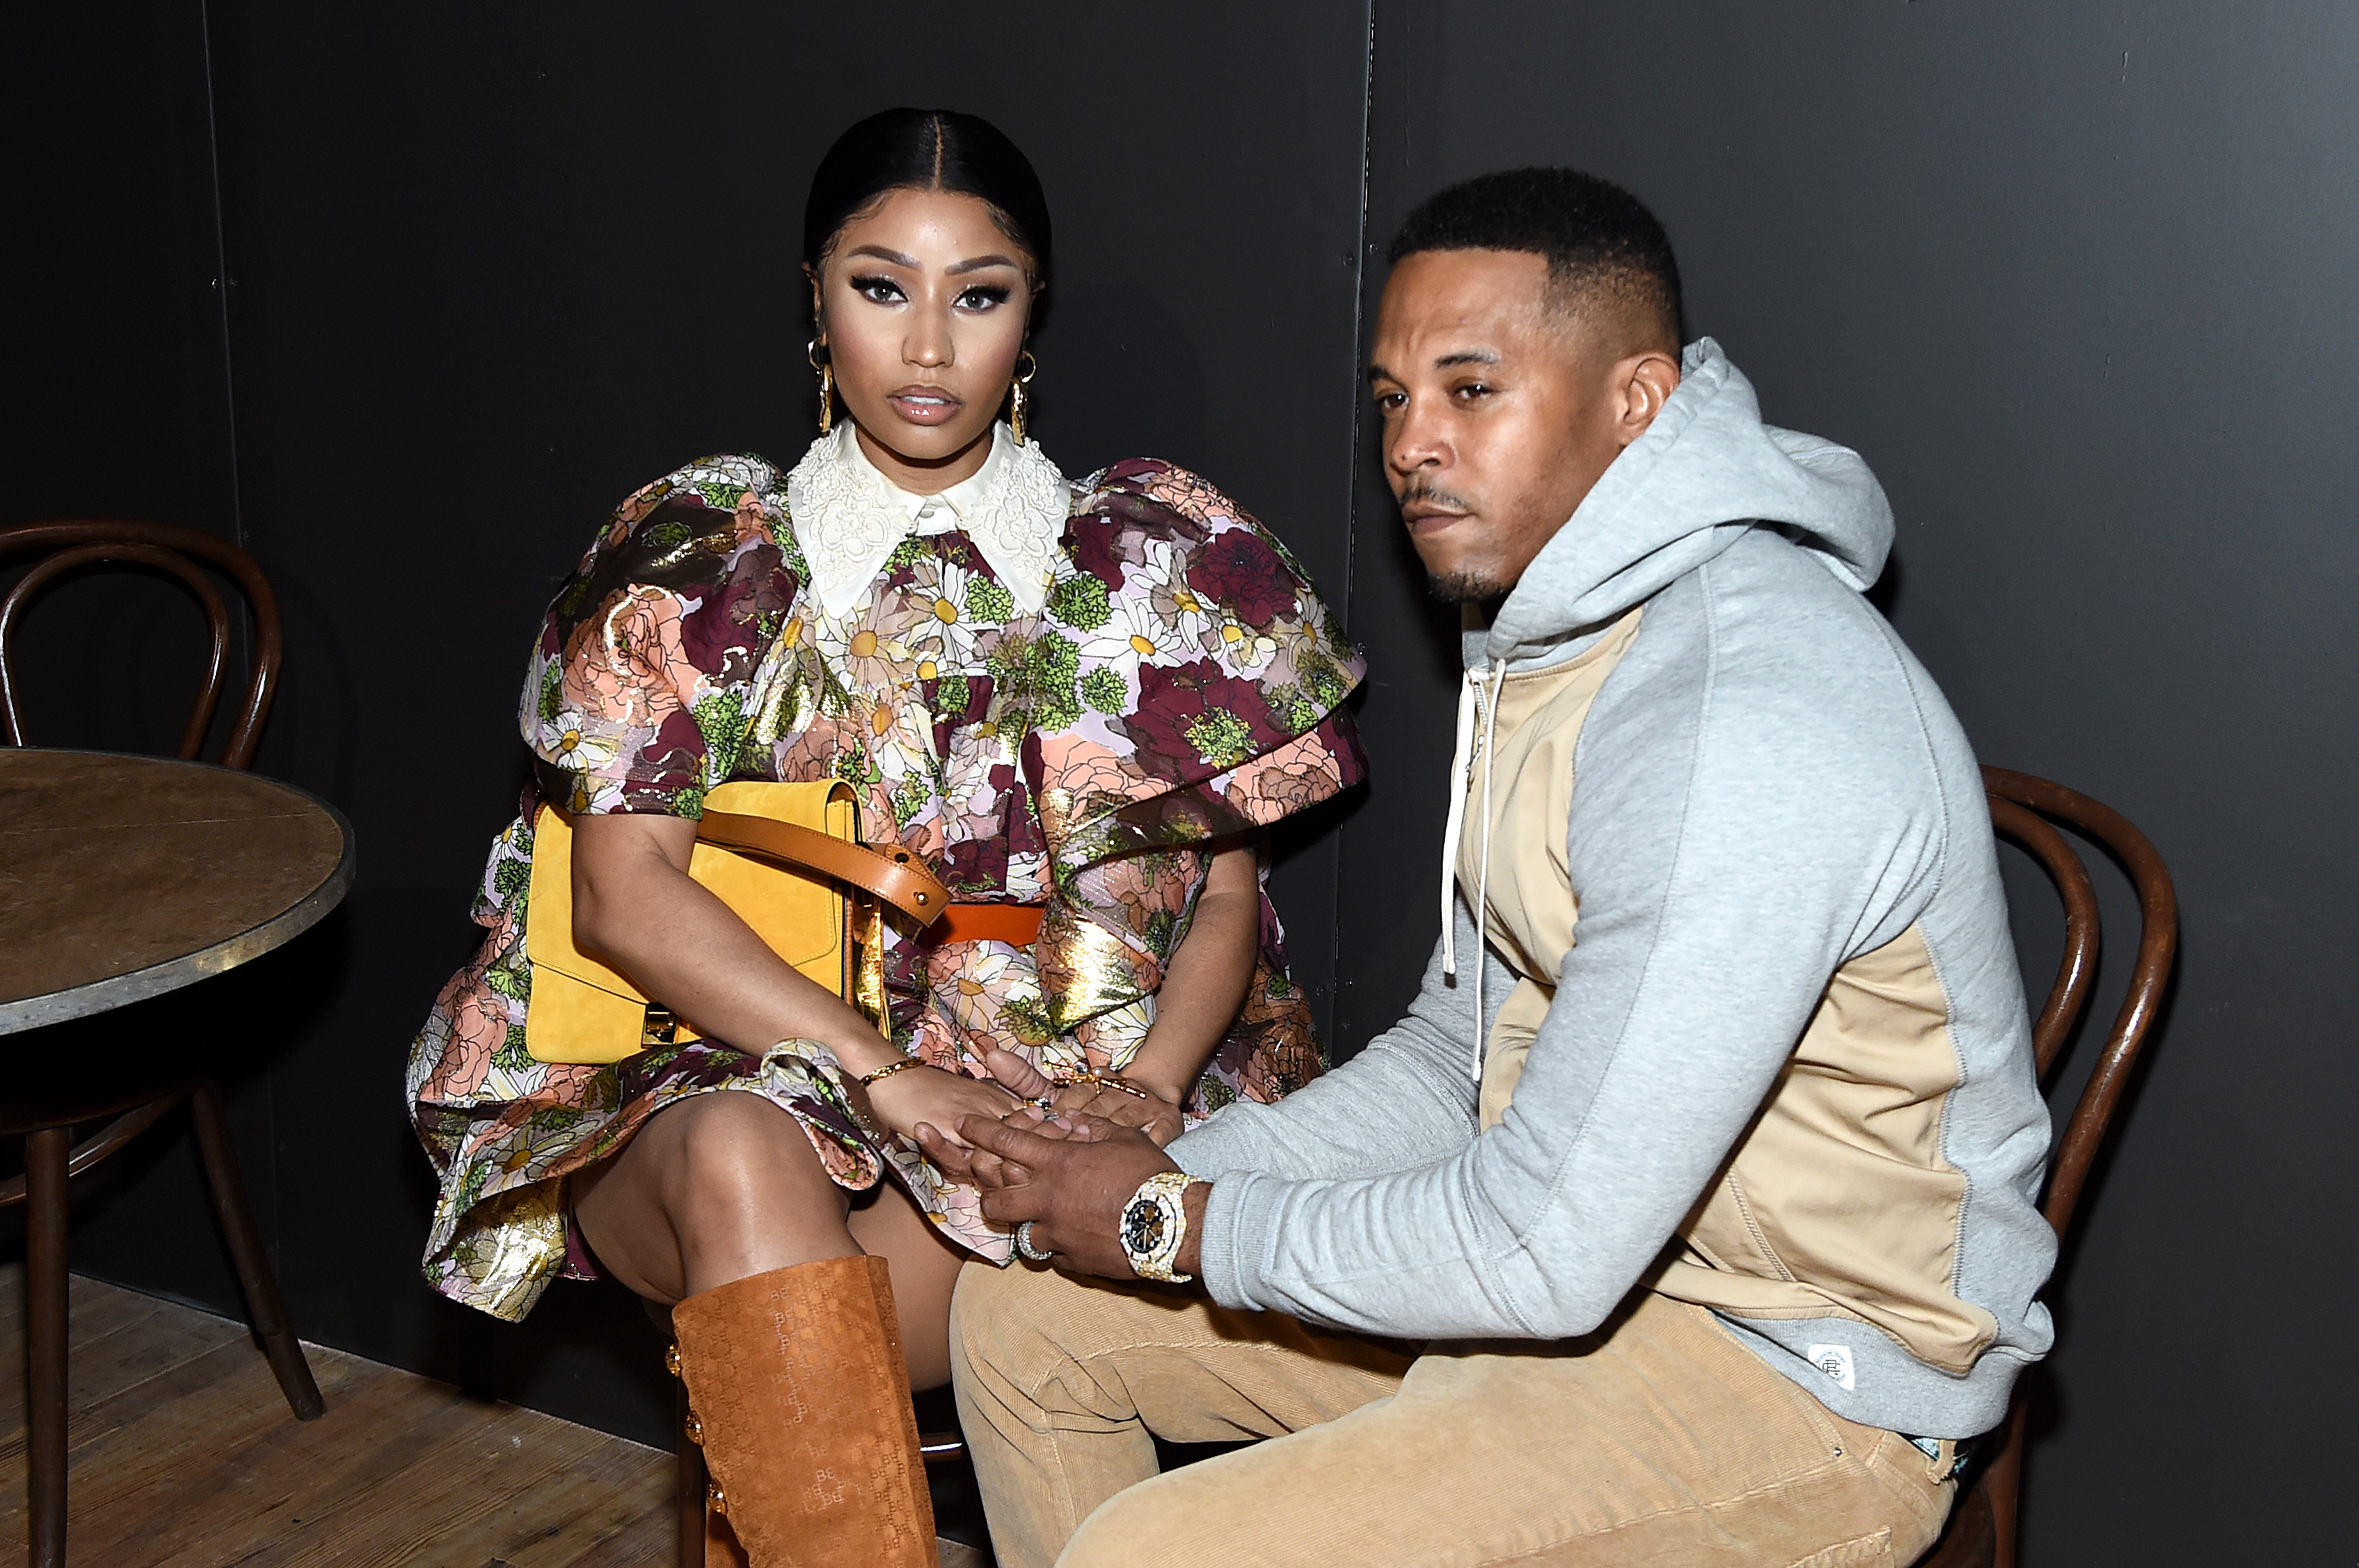 Nicki Minaj & Kenneth Petty Sued By Security Guard Who Says He Was Punched: Report